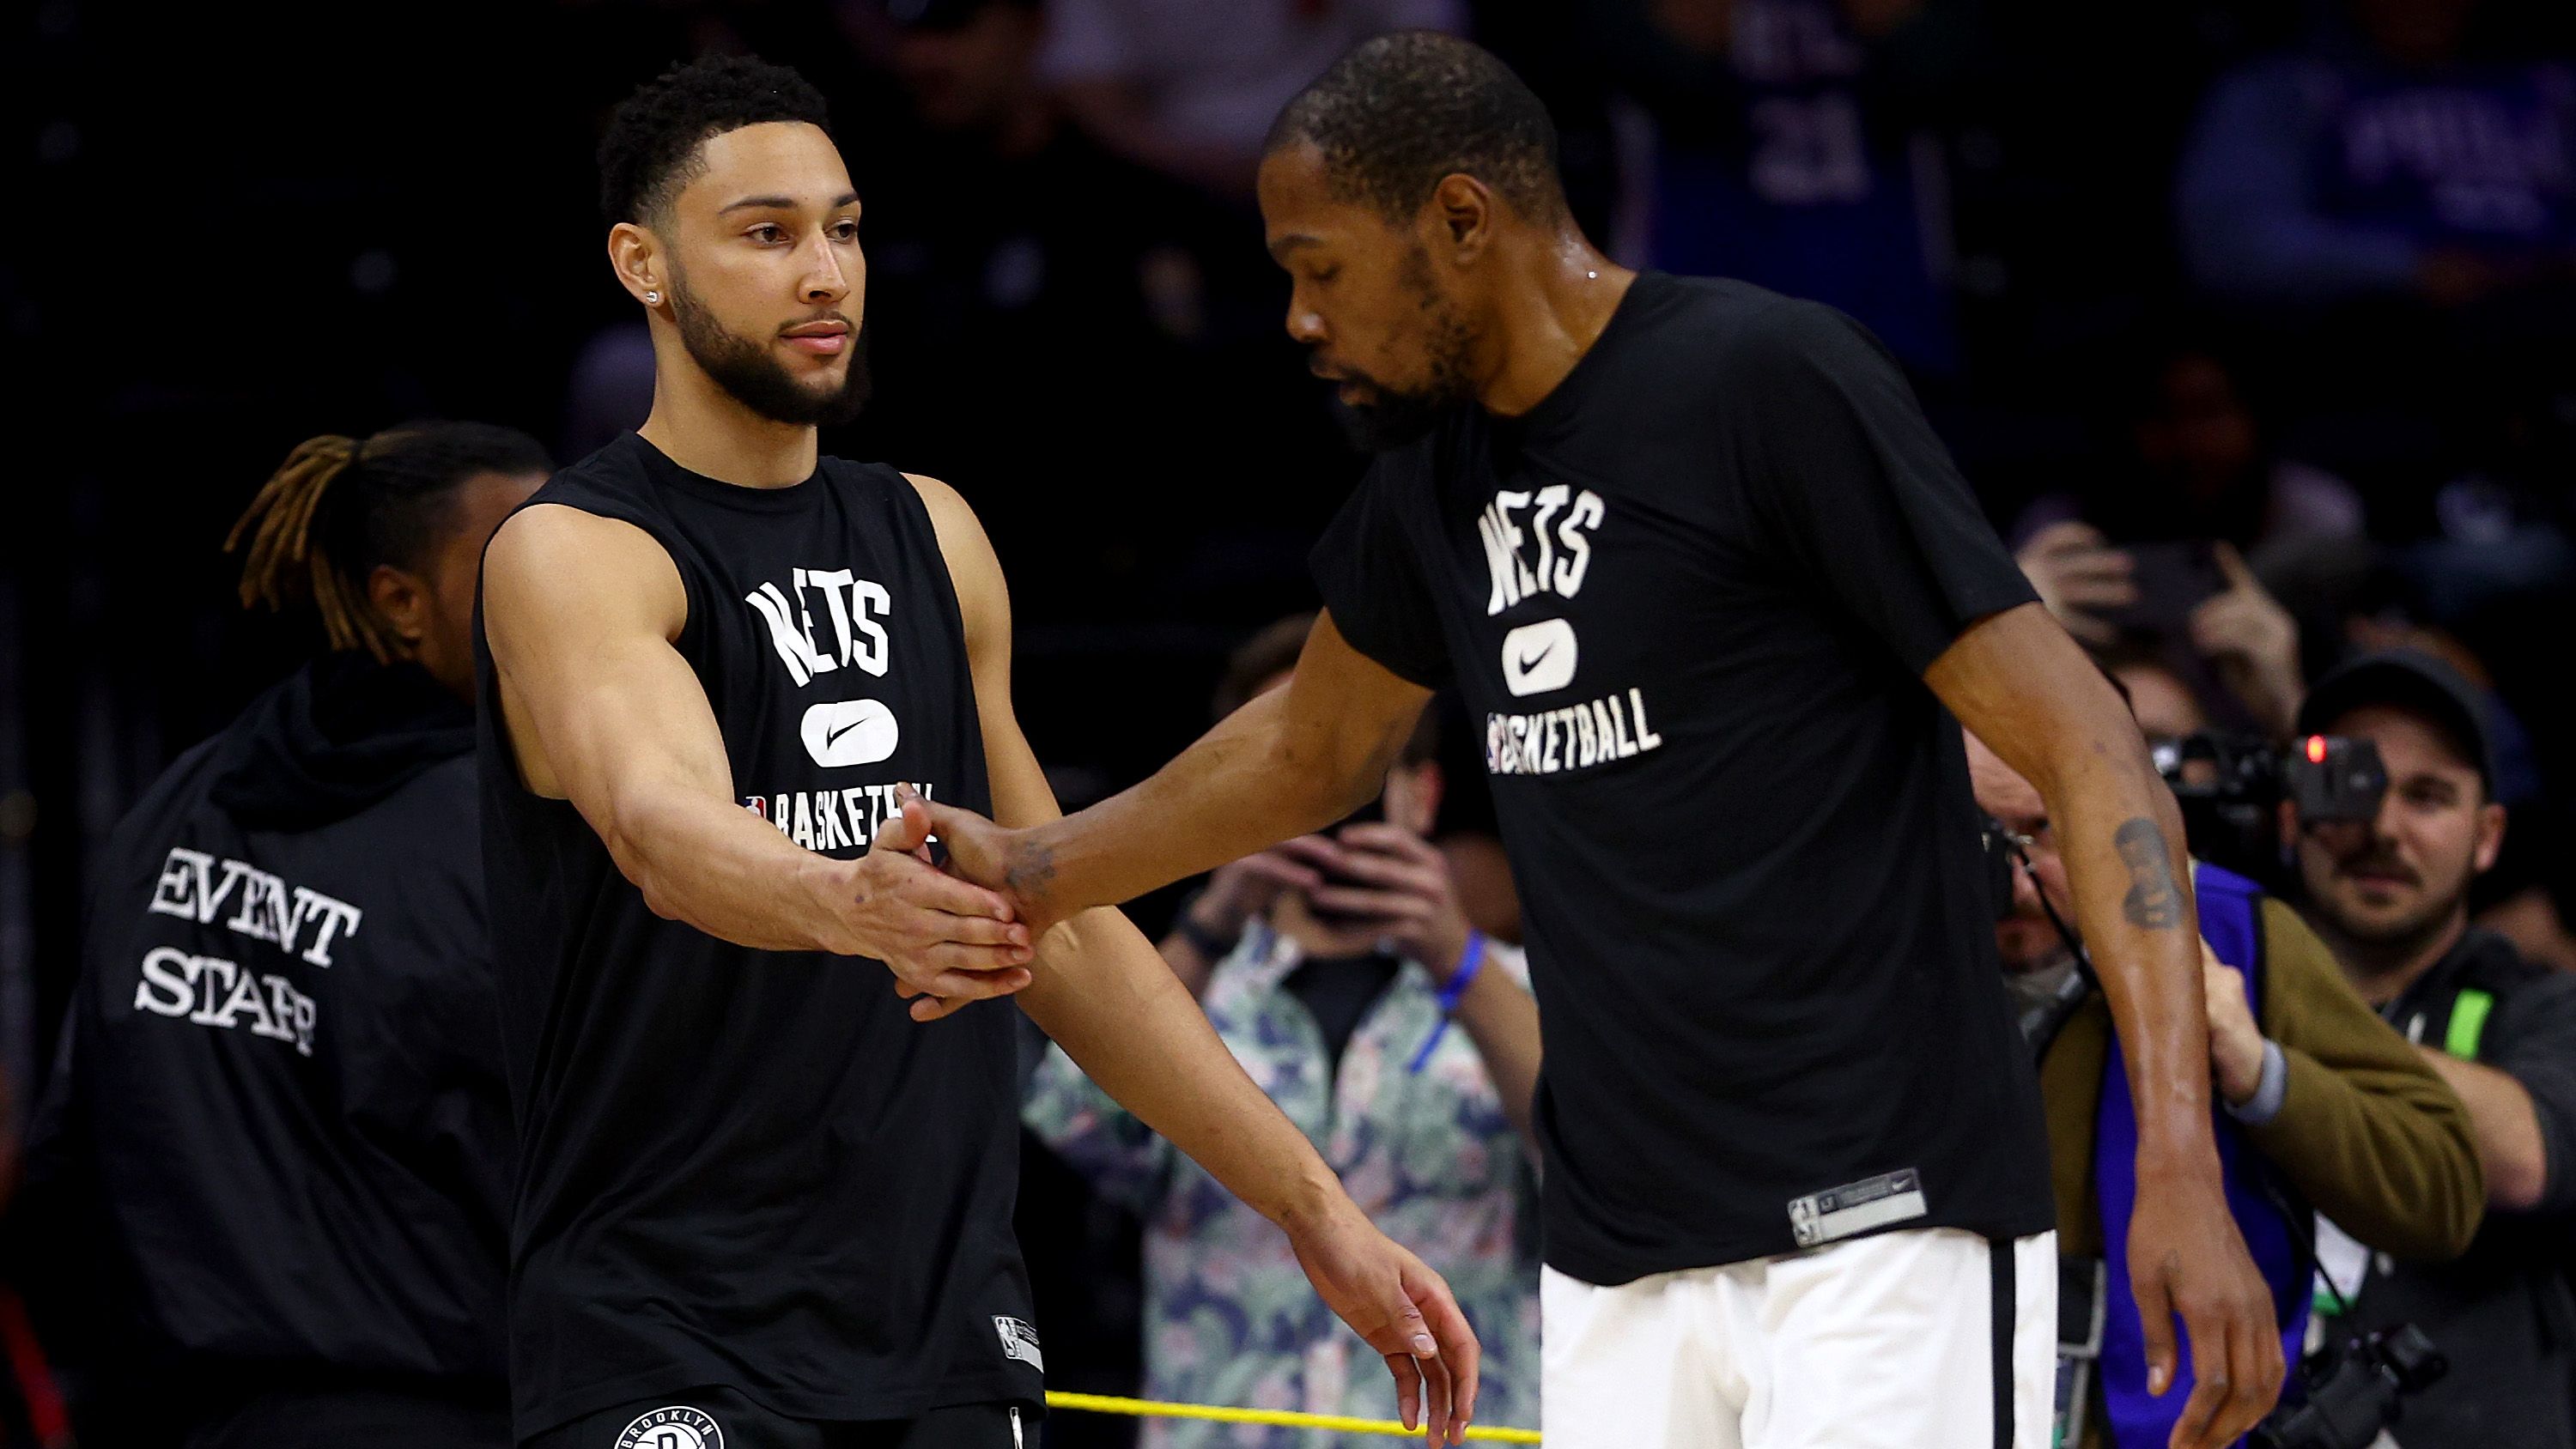 Ben Simmons and Kevin Durant of the Brooklyn Nets greet each other during warm ups before the game against the Philadelphia 76ers.